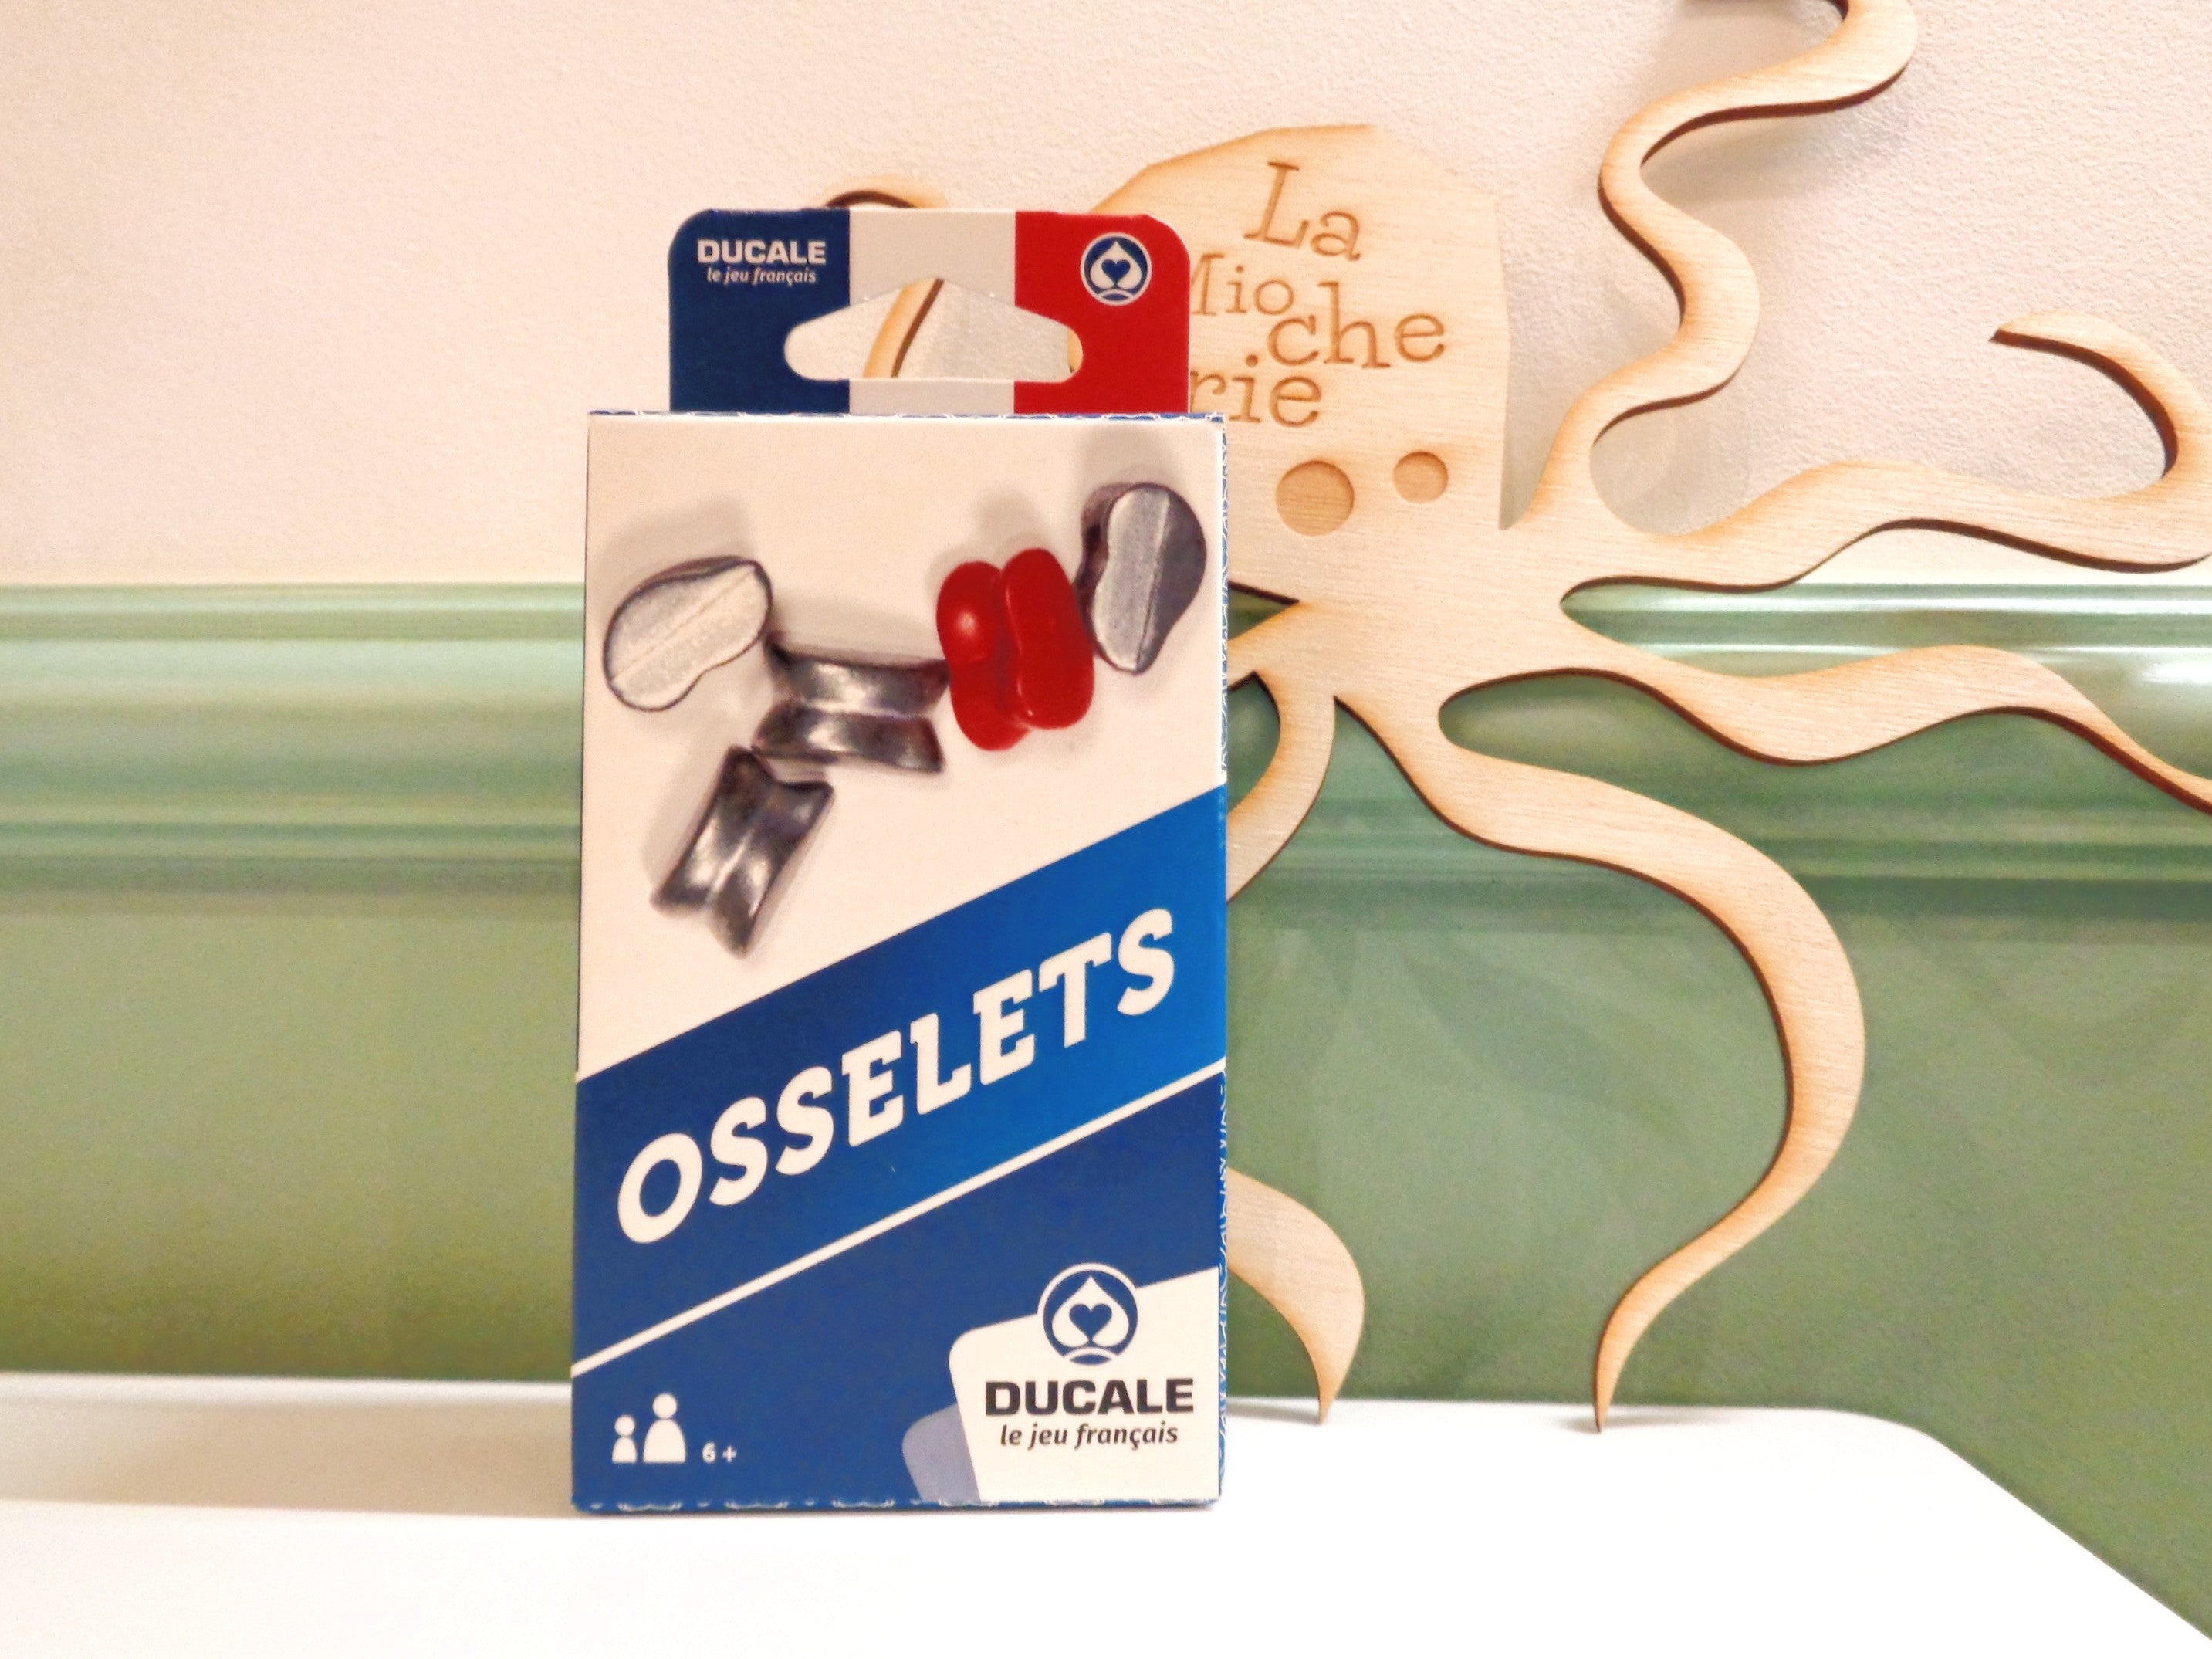 Les Osselets - Made in France - Ducale